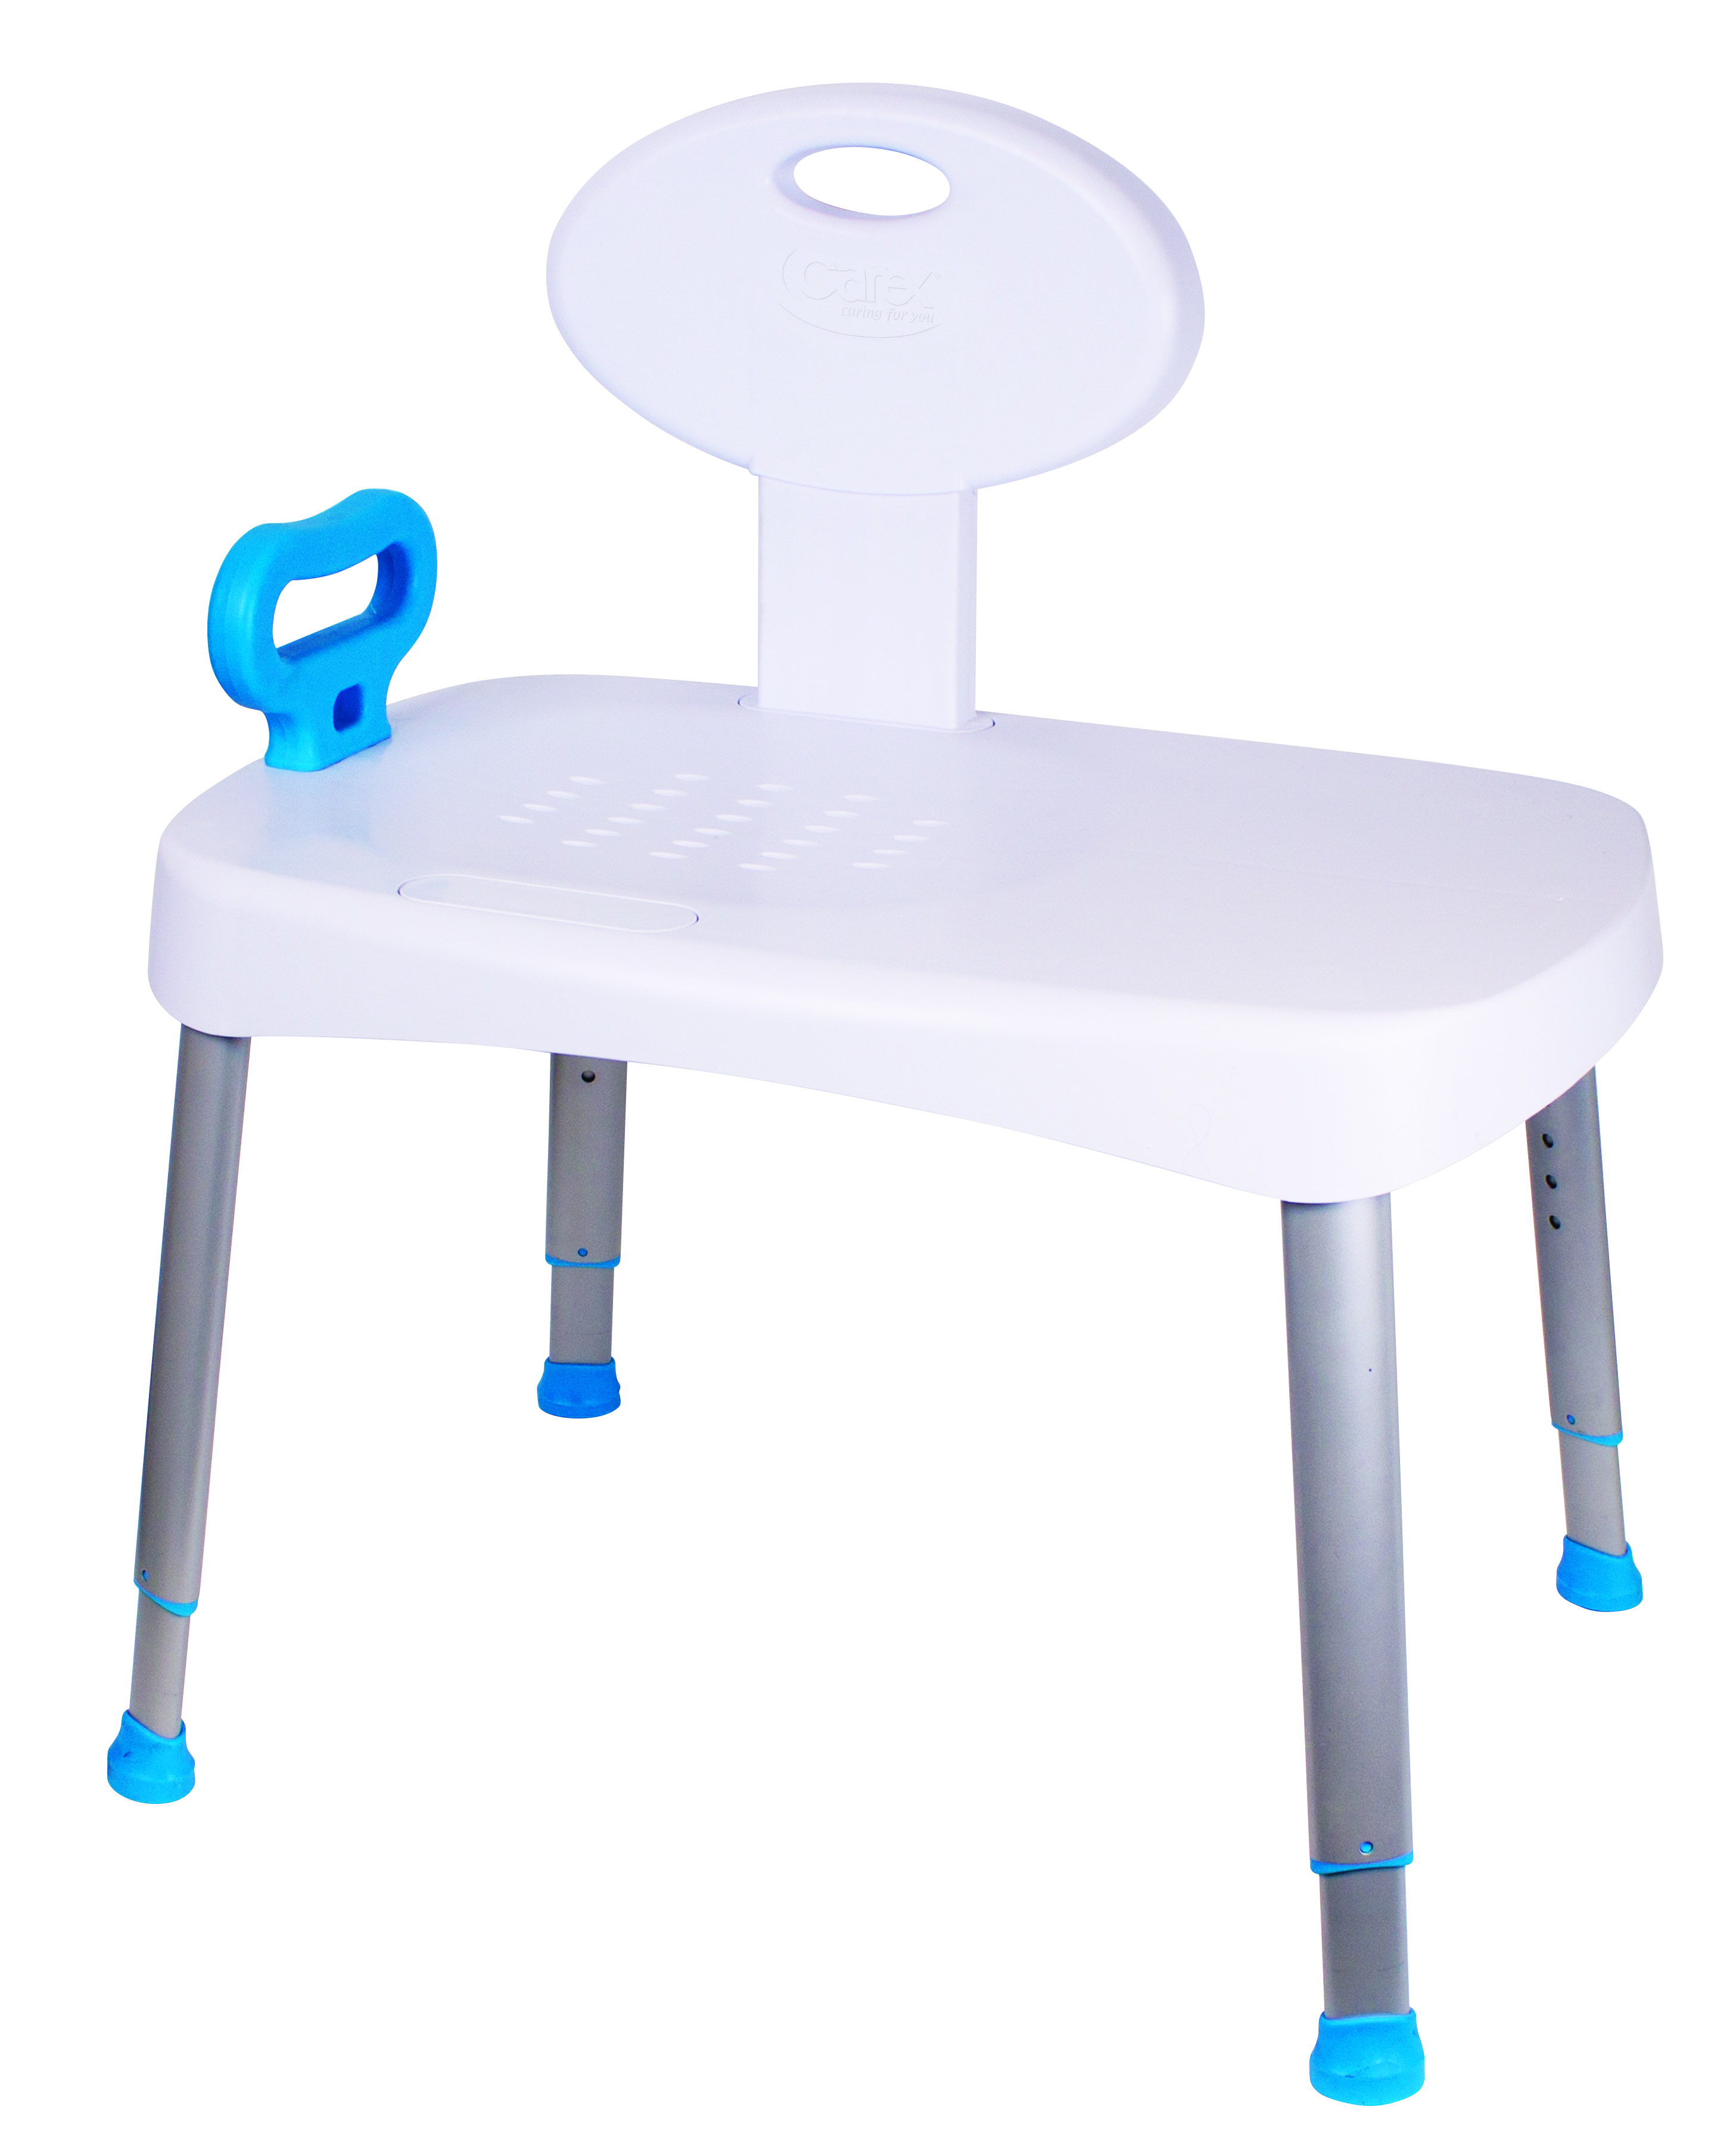 The Carex Easy Transfer Bench by Carex